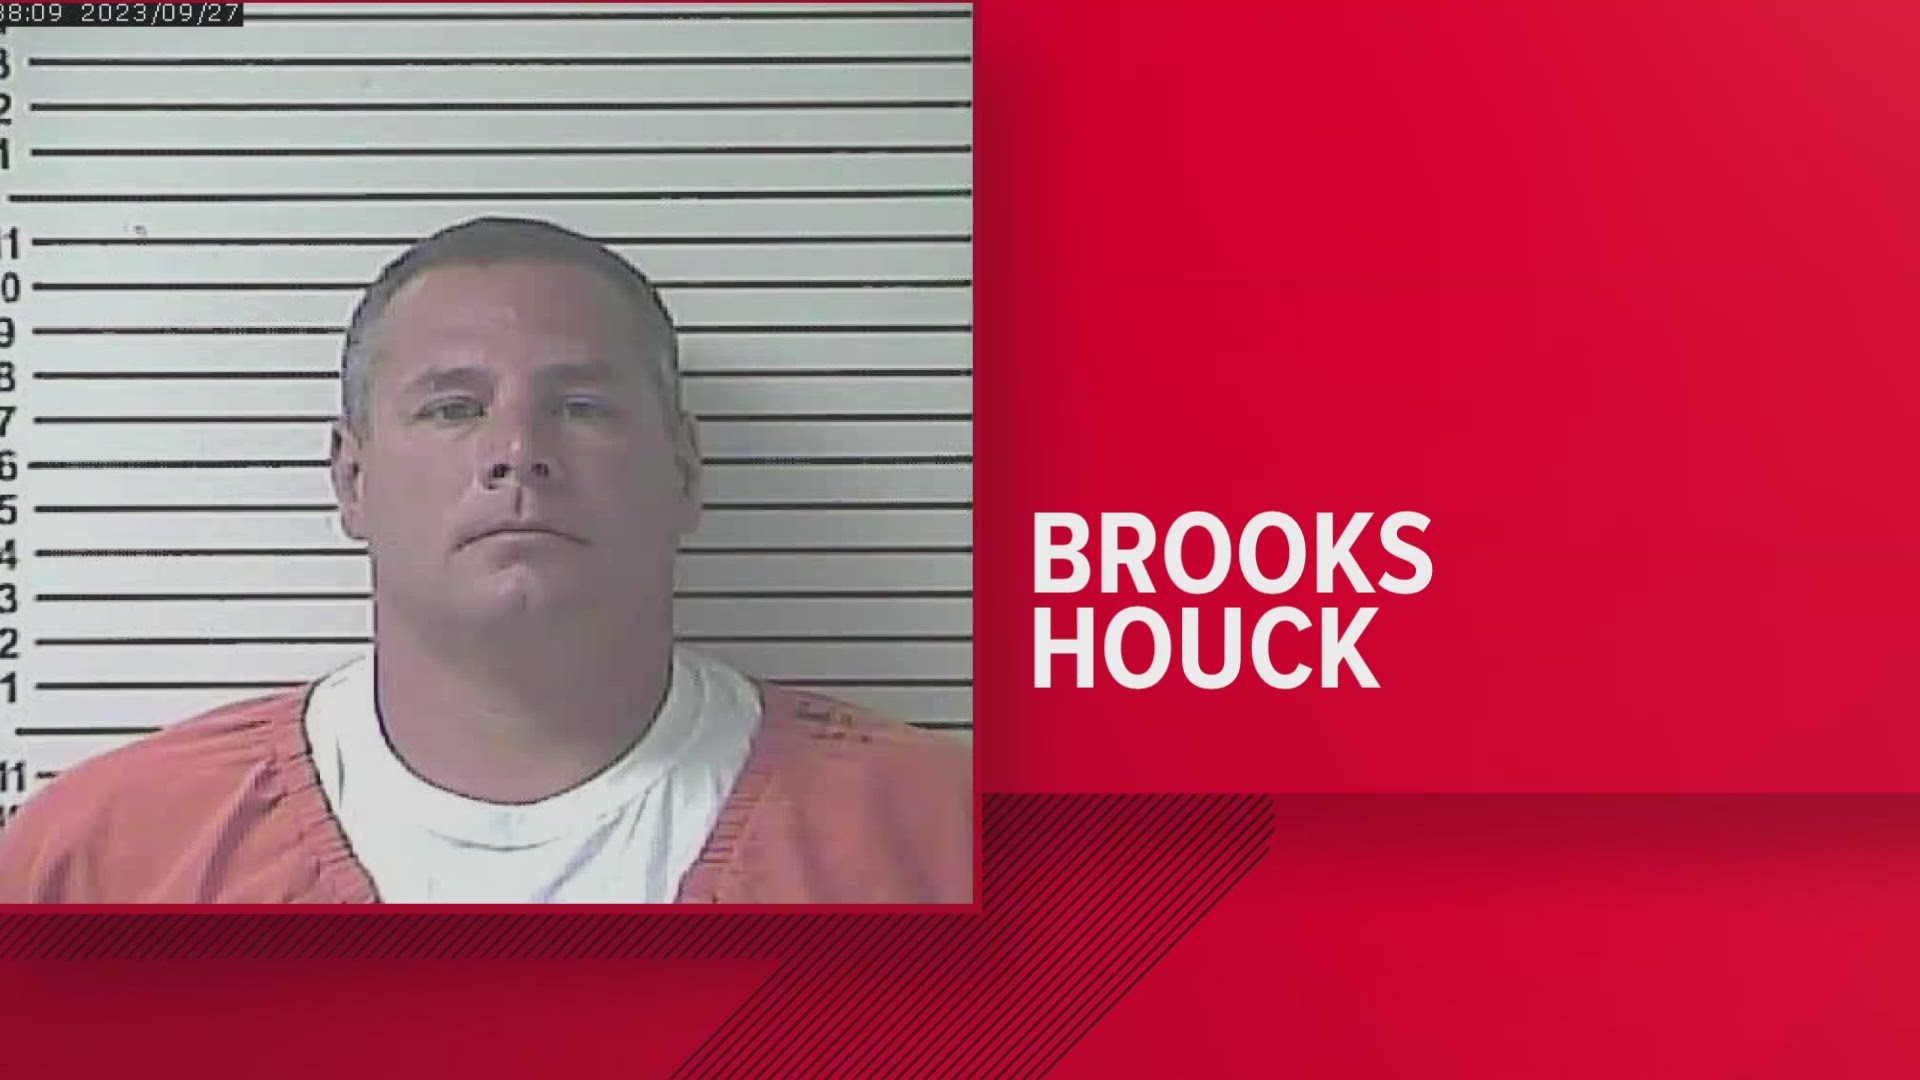 Kentucky State Police and the FBI arrested Houck Monday morning and has since been transferred to the Hardin County jail.